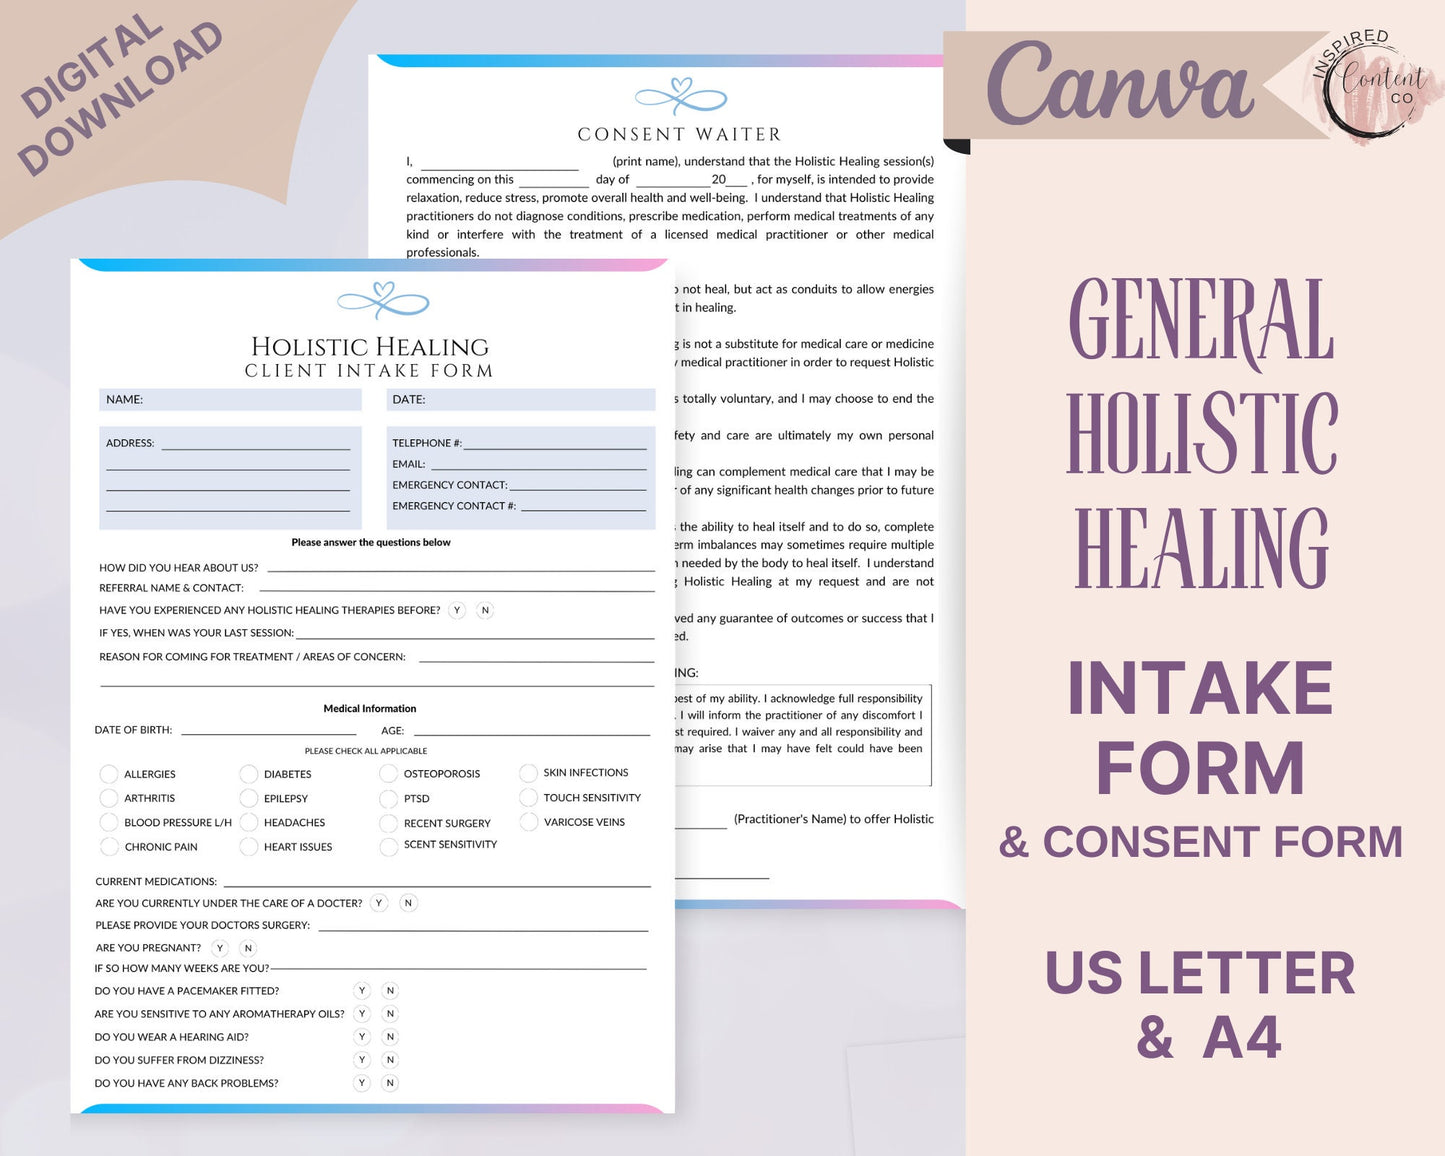 Holistic Healing Intake Form and Consent Waiver Form, Energy Healing Intake Form Editable in Canva, Reiki Intake Form Template, Consent Form